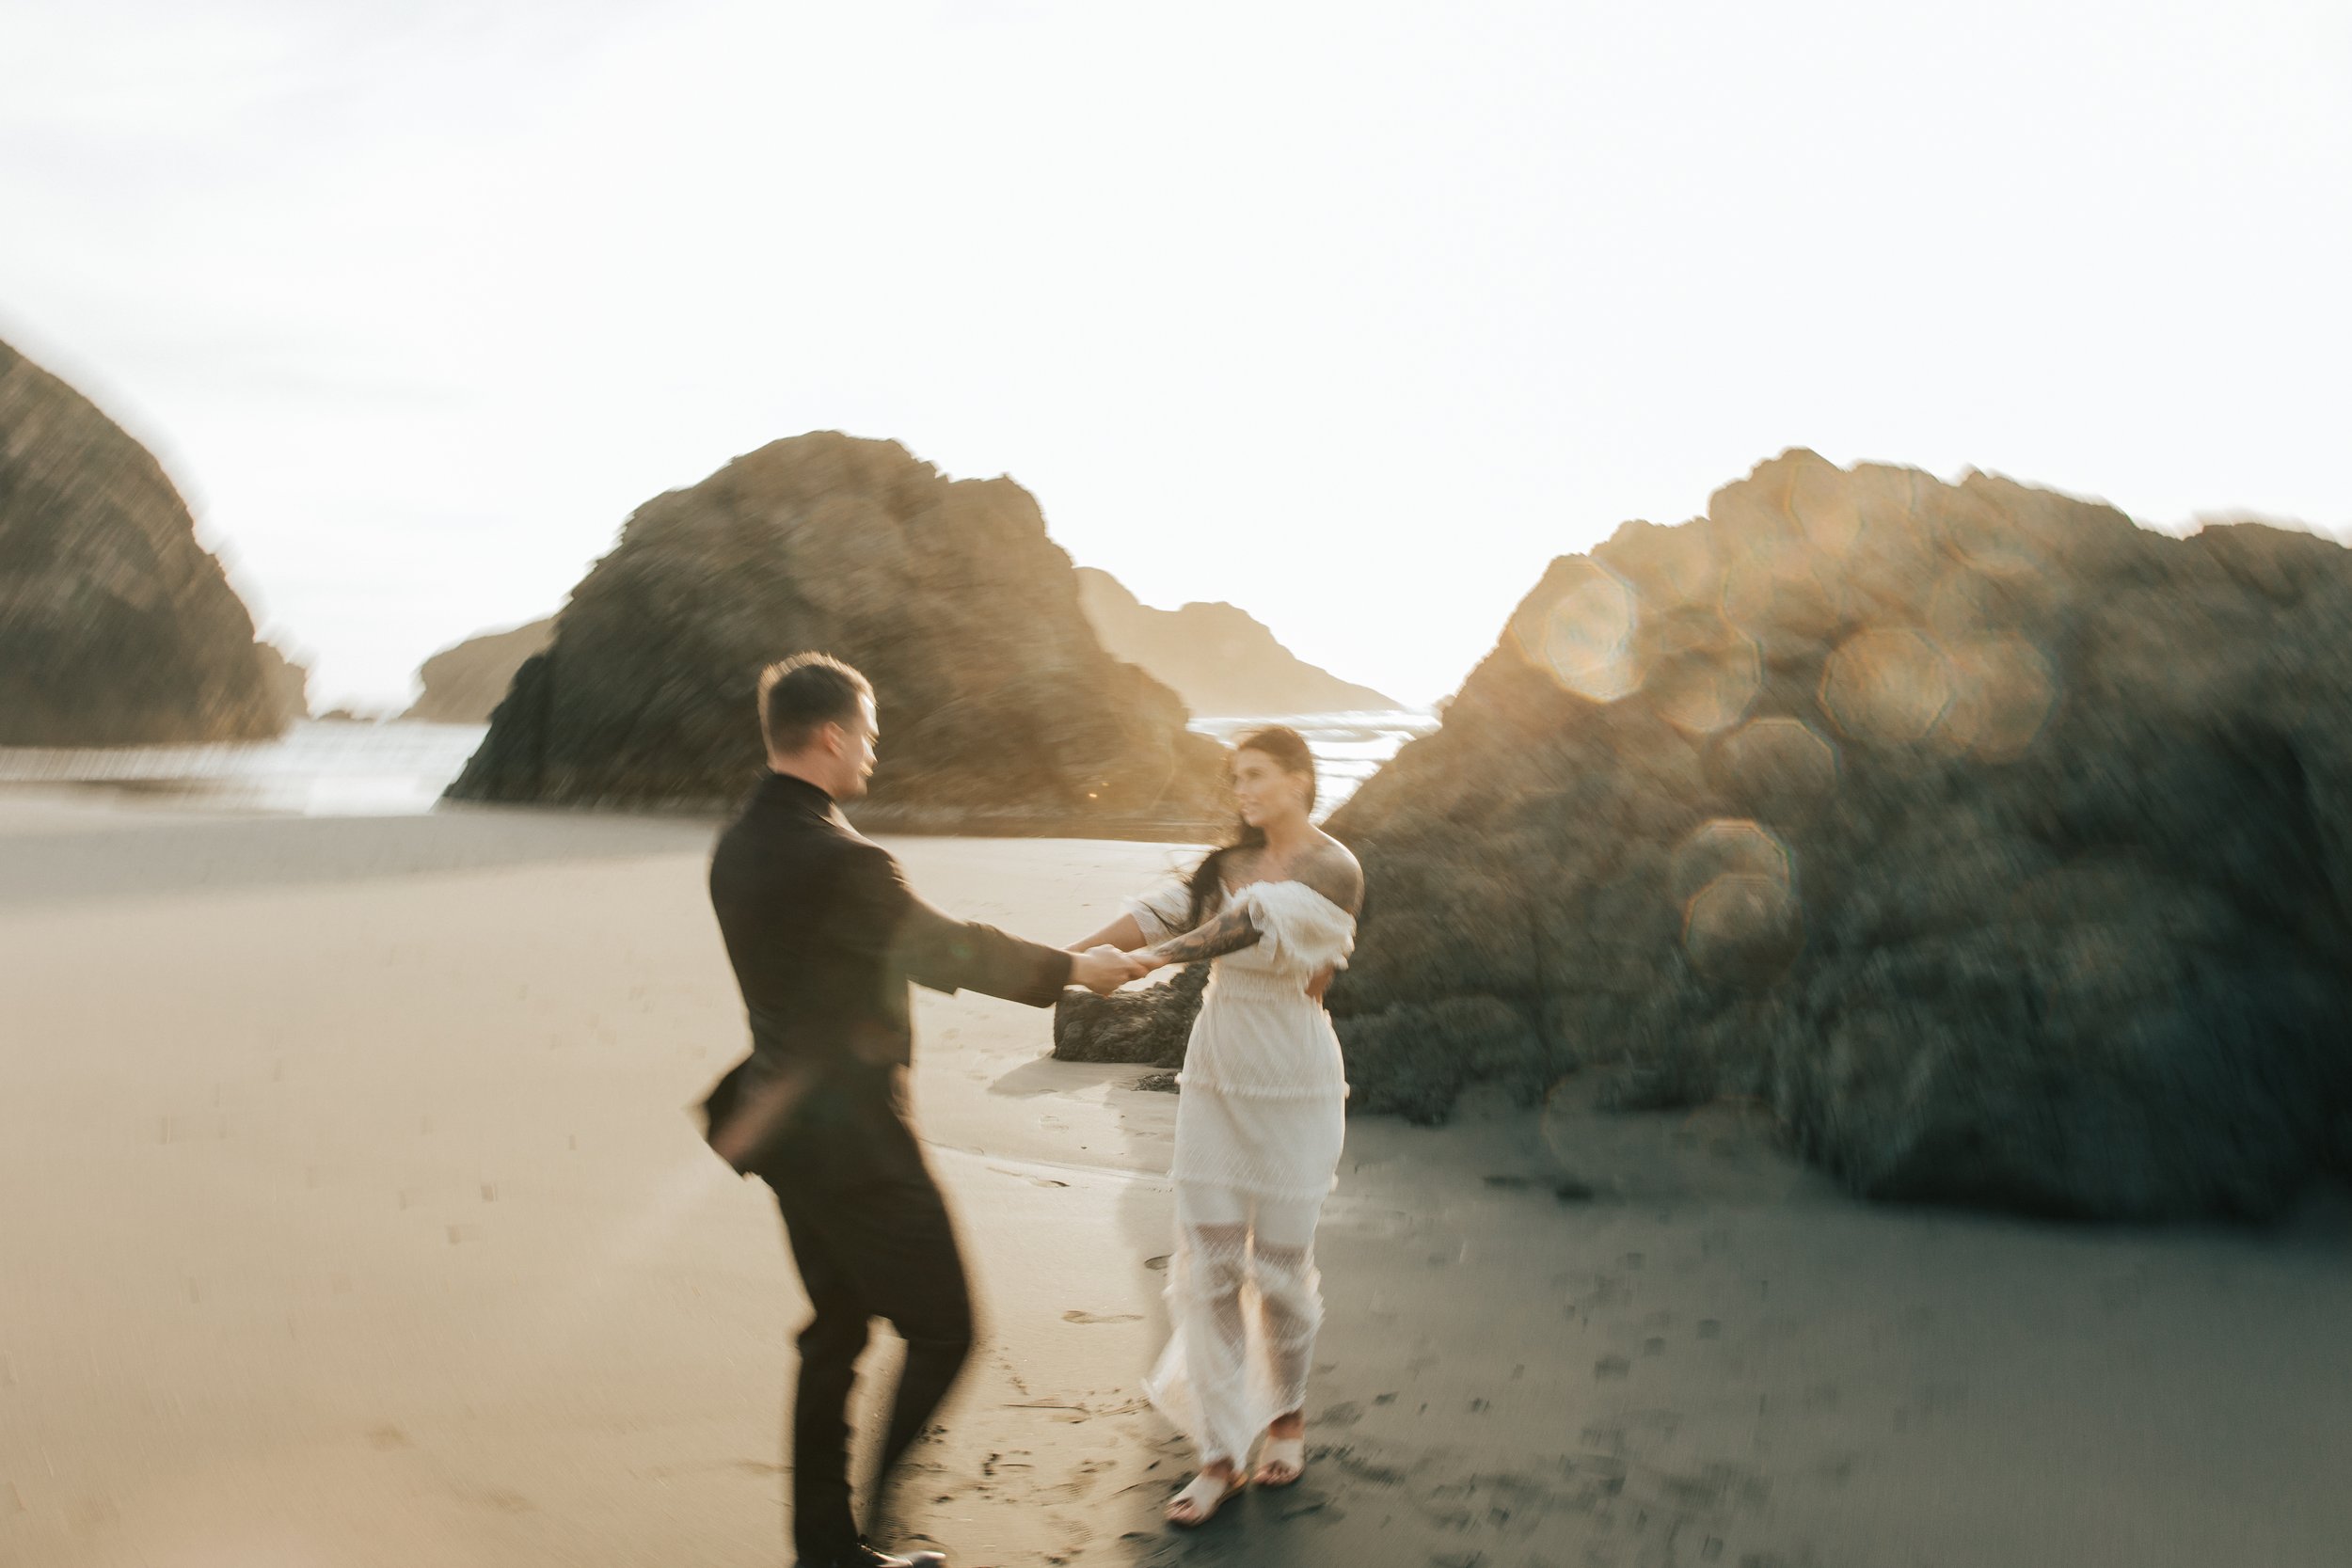  Oregon coast elopement. Couple elopes on the beach with the sun shining behind them. Sun rays behind rocks. Beach with rocks and haystacks. Southern Oregon. Couple spinning around in circles on the coast. Brookings, Oregon. Samuel H Boardman elopeme